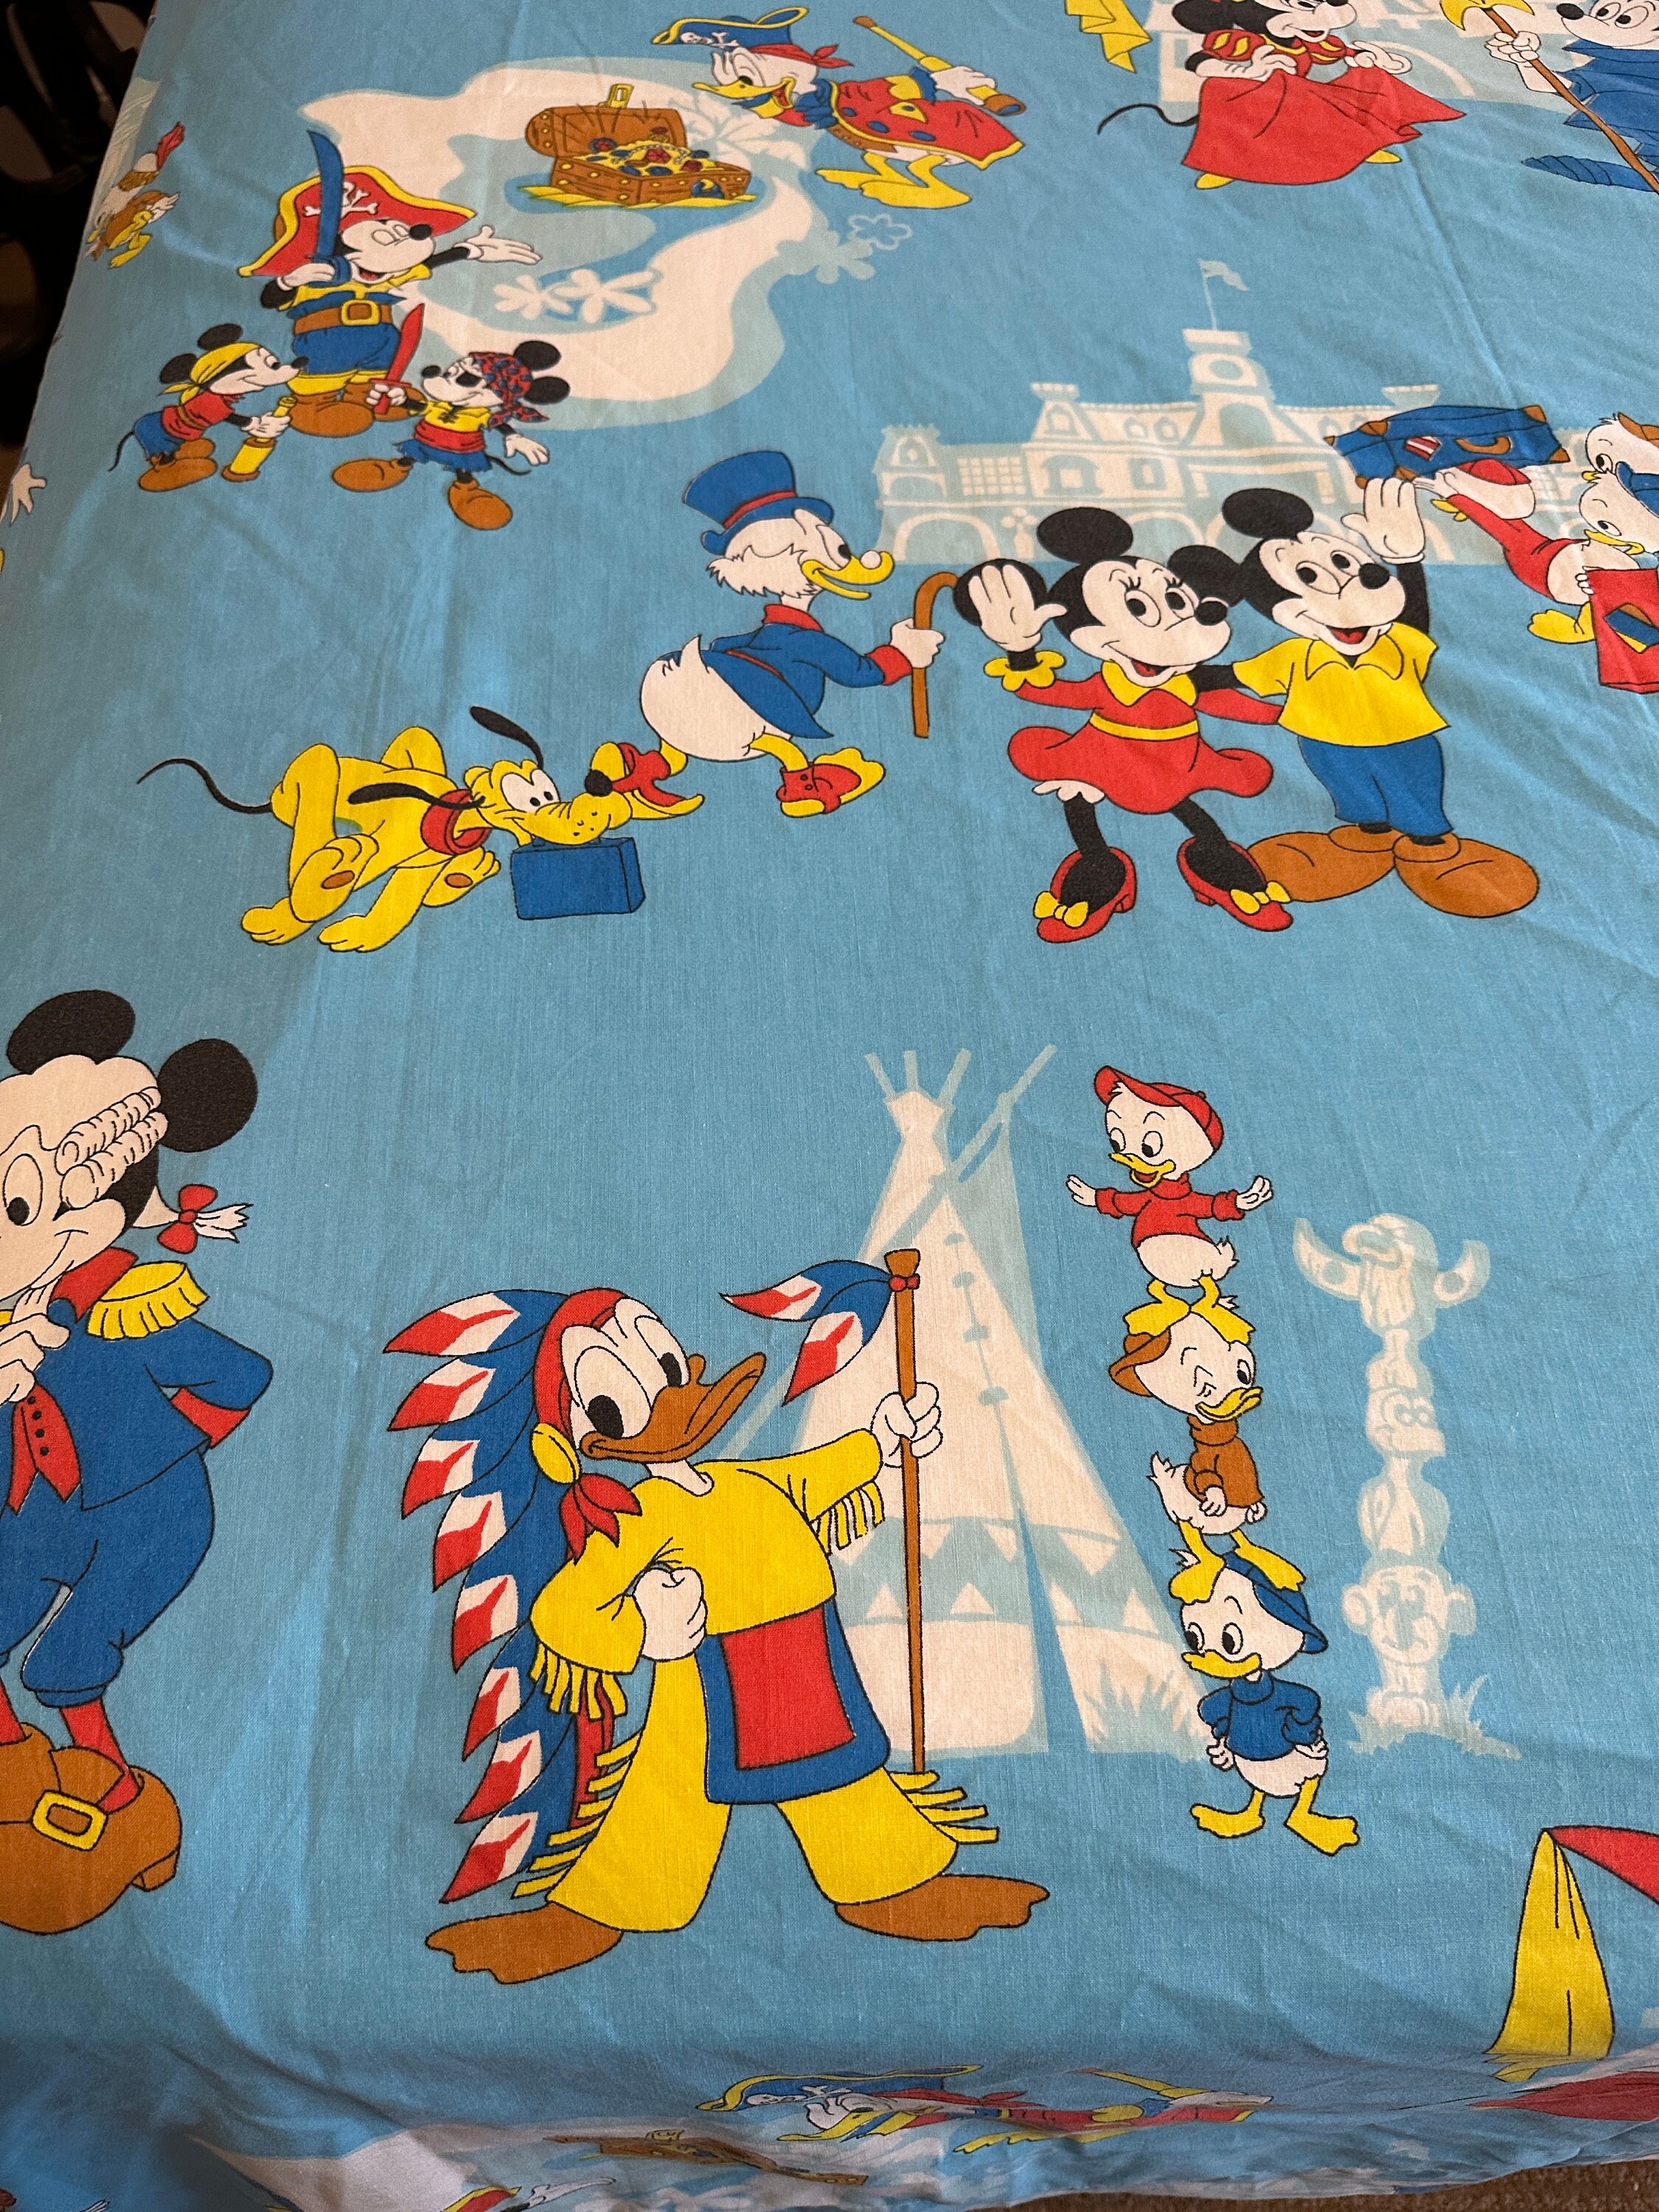 Walt Disney sheets Mickey Mouse Minnie Mouse Donald Duck Bedding Sets